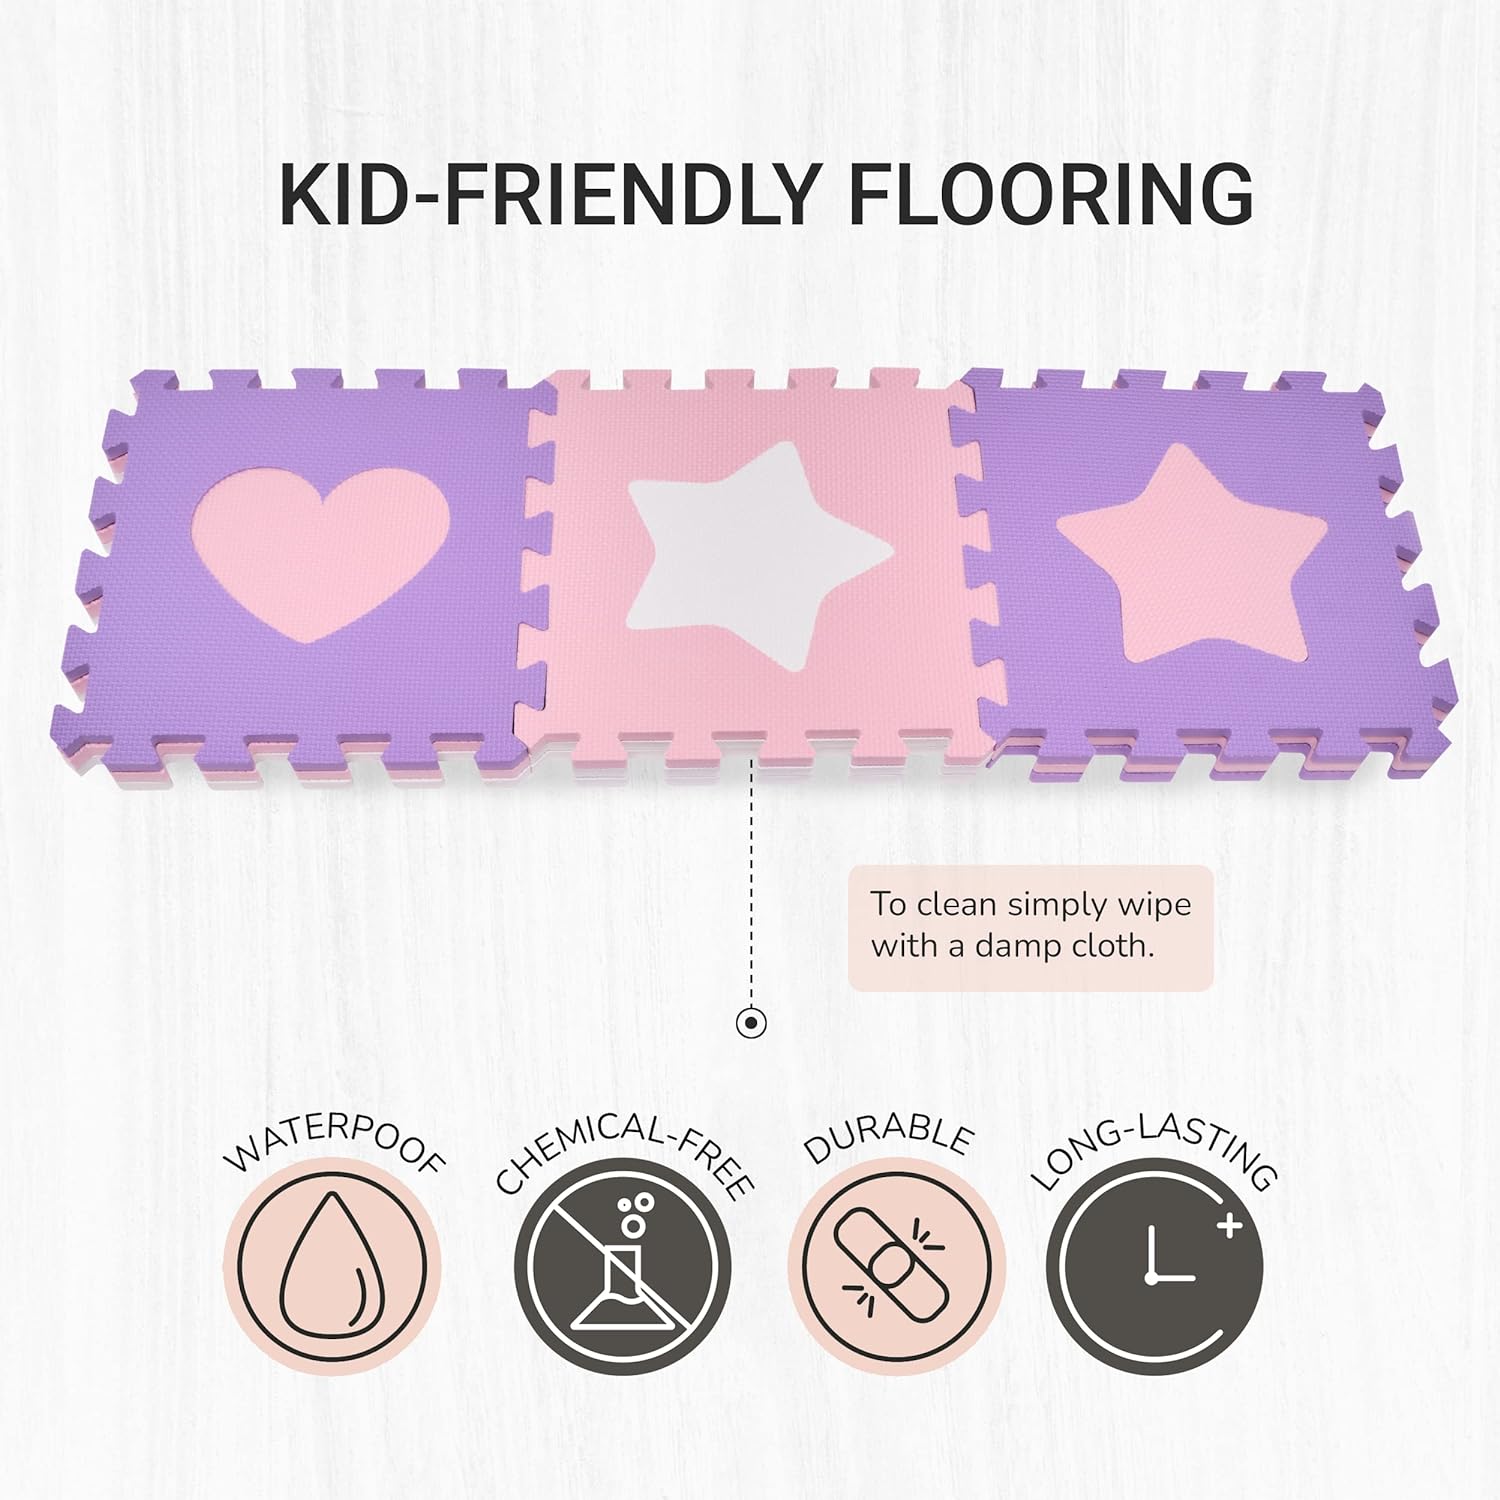 Tadpoles Hearts and Stars Foam Playmats for Baby and Kids, 16 Interlocking Play Mat, Waterproof, Durable, Long-lasting | Total Floor Coverage 50” x 50” | Pink, Purple - image 4 of 6